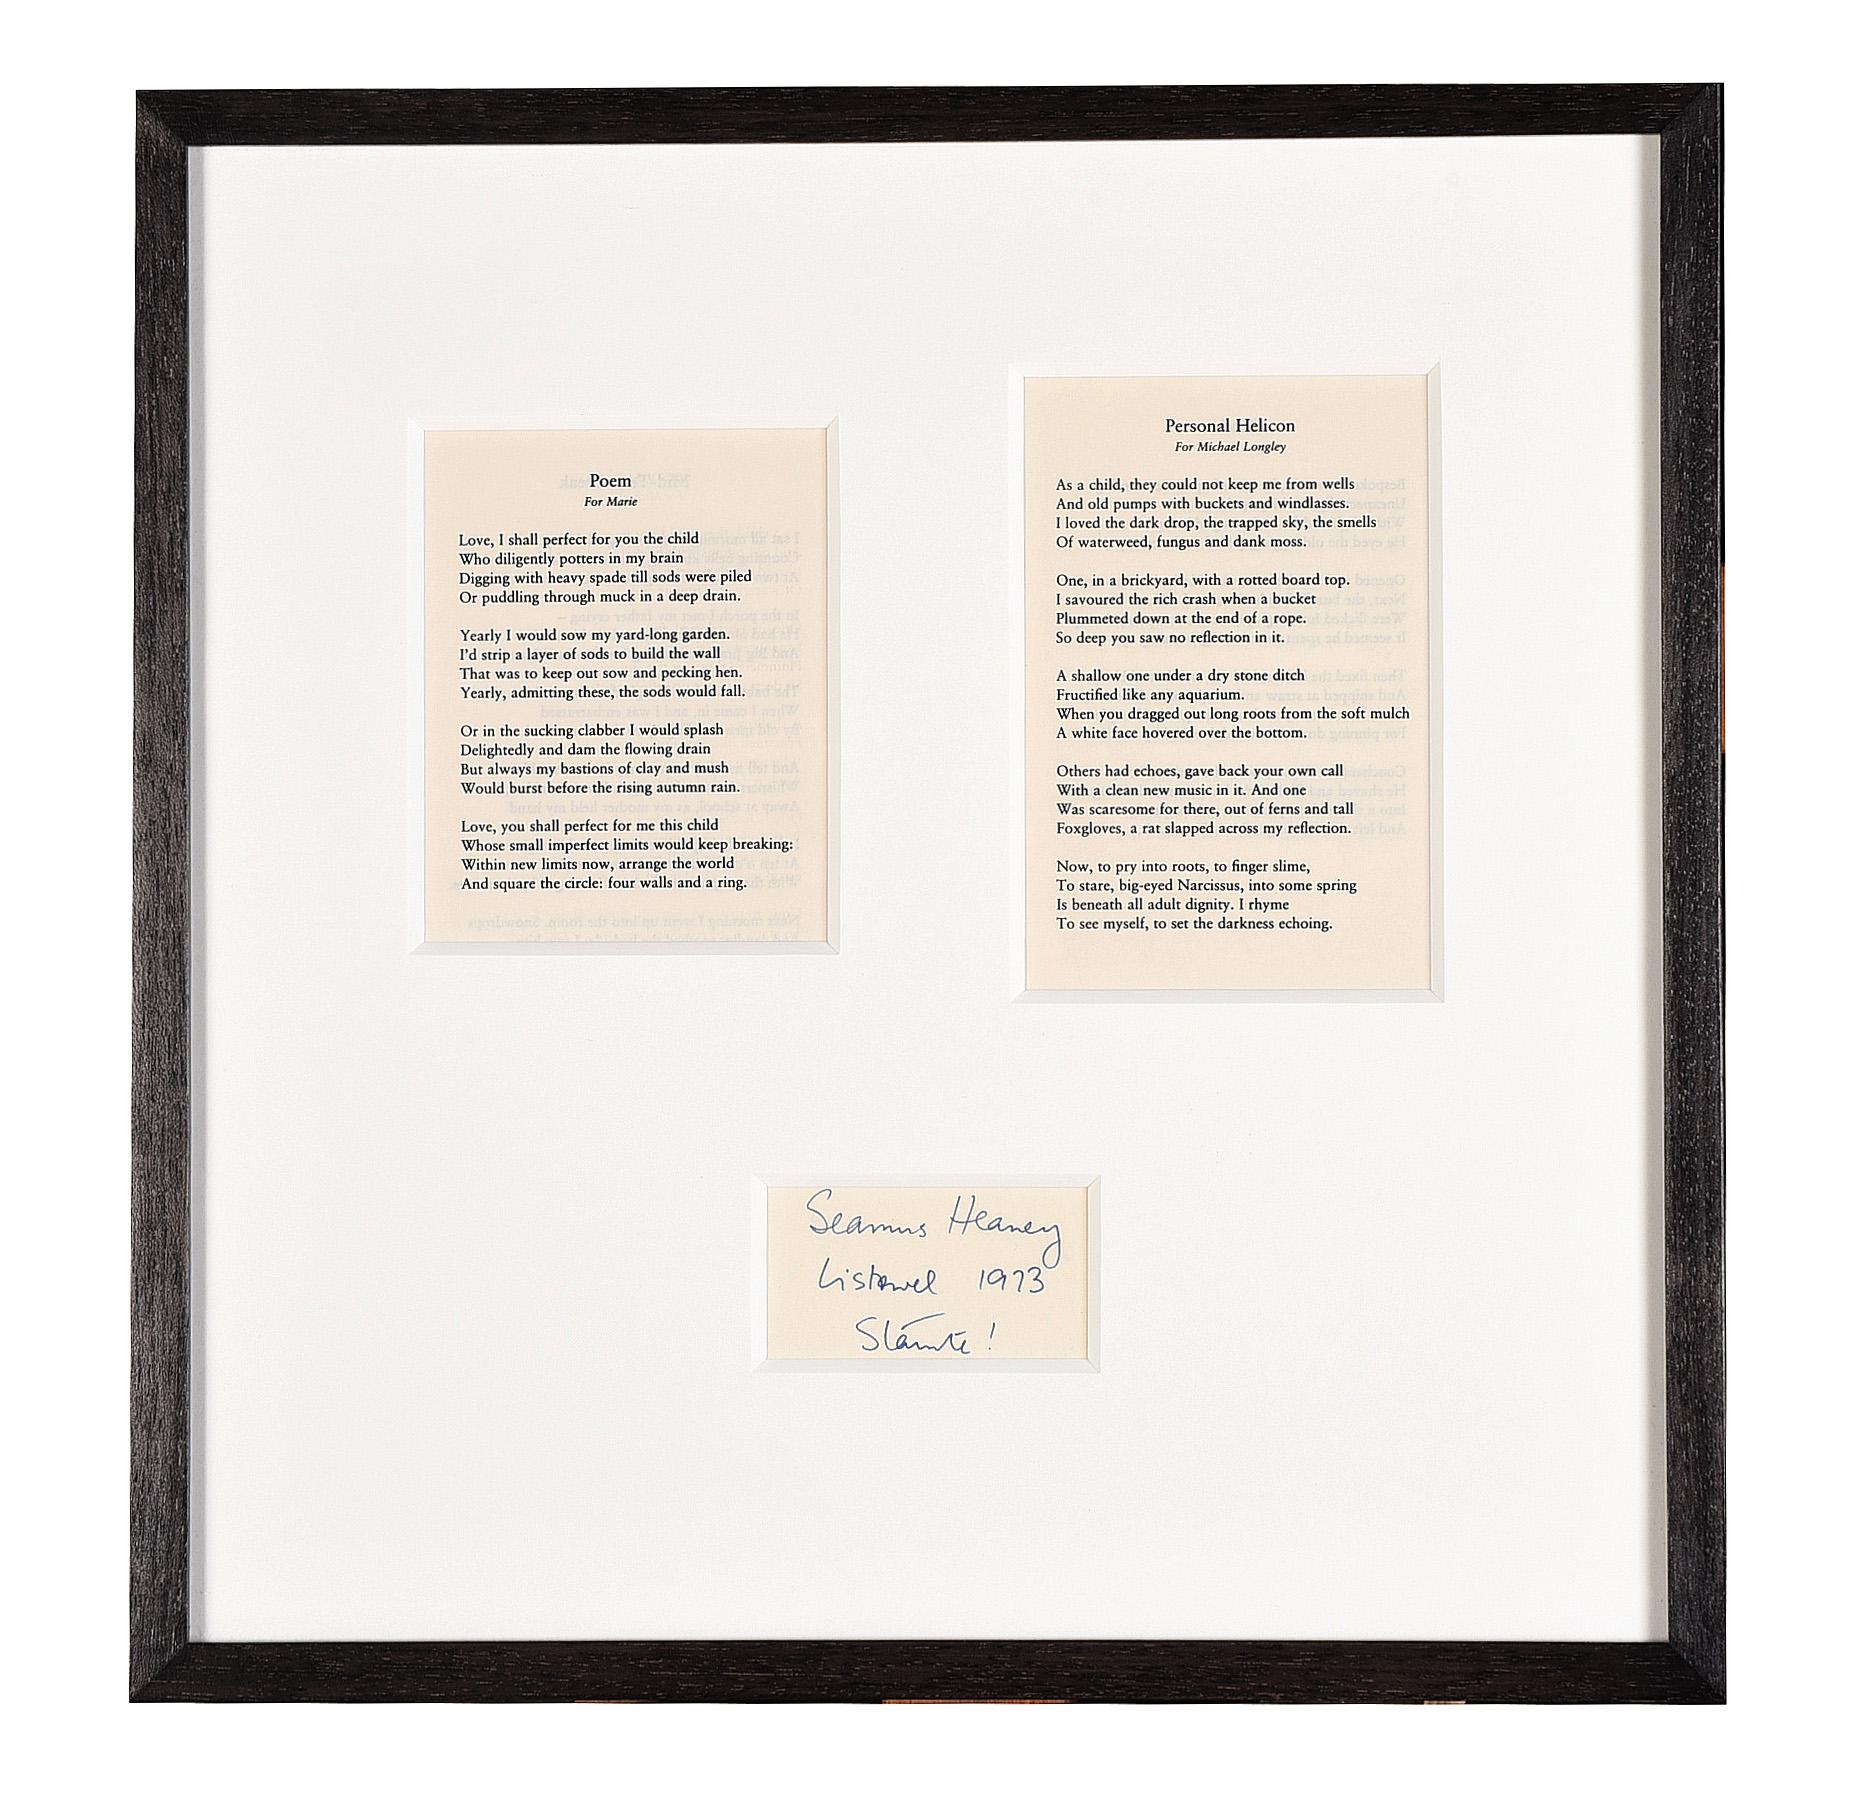 Poet: Seamus Heaney
Title: Poem for Marie & Personal Helicon for Michael Longley
Medium: Black ink printed on paper
Framed size: 16.5 x 16 inches
Signed: Signed
Framed.

Unique, very early signed item
Dated and have the location where they